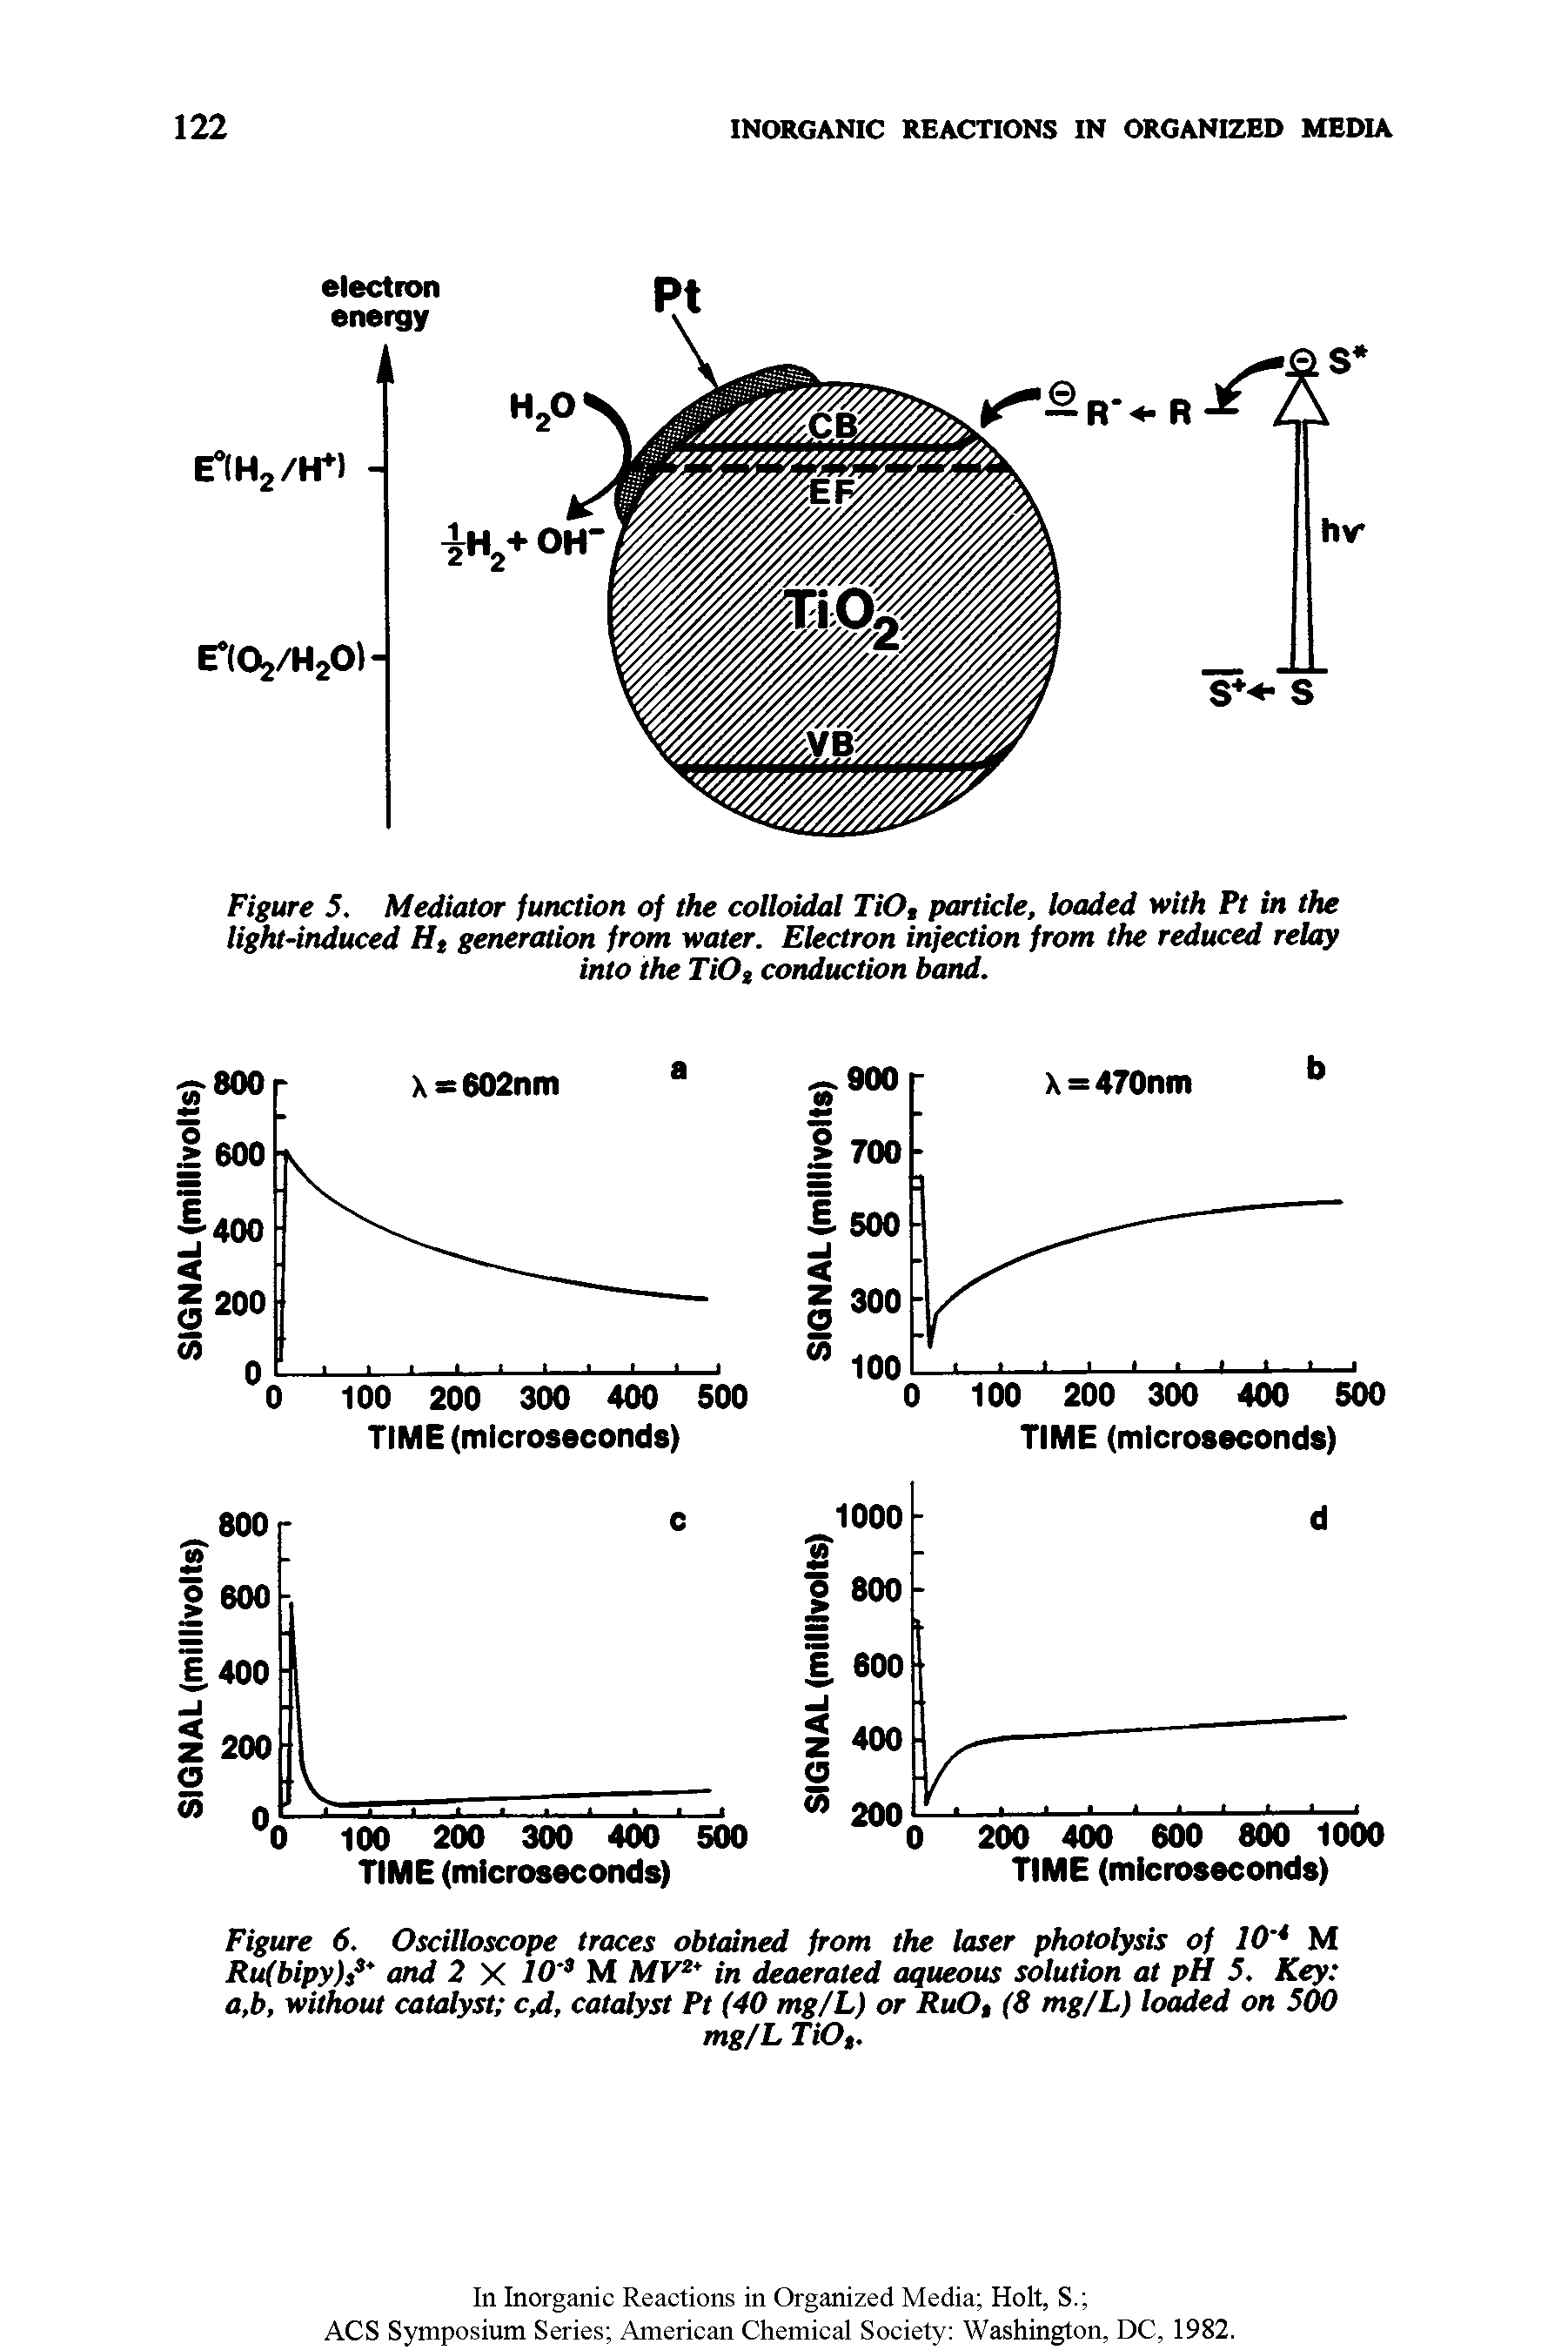 Figure 5. Mediator function of the colloidal TiOt icicle, loaded with Ft in the light-induced Ht generation from water. Electron injection from the reduced relay into the TiOt conduction band.